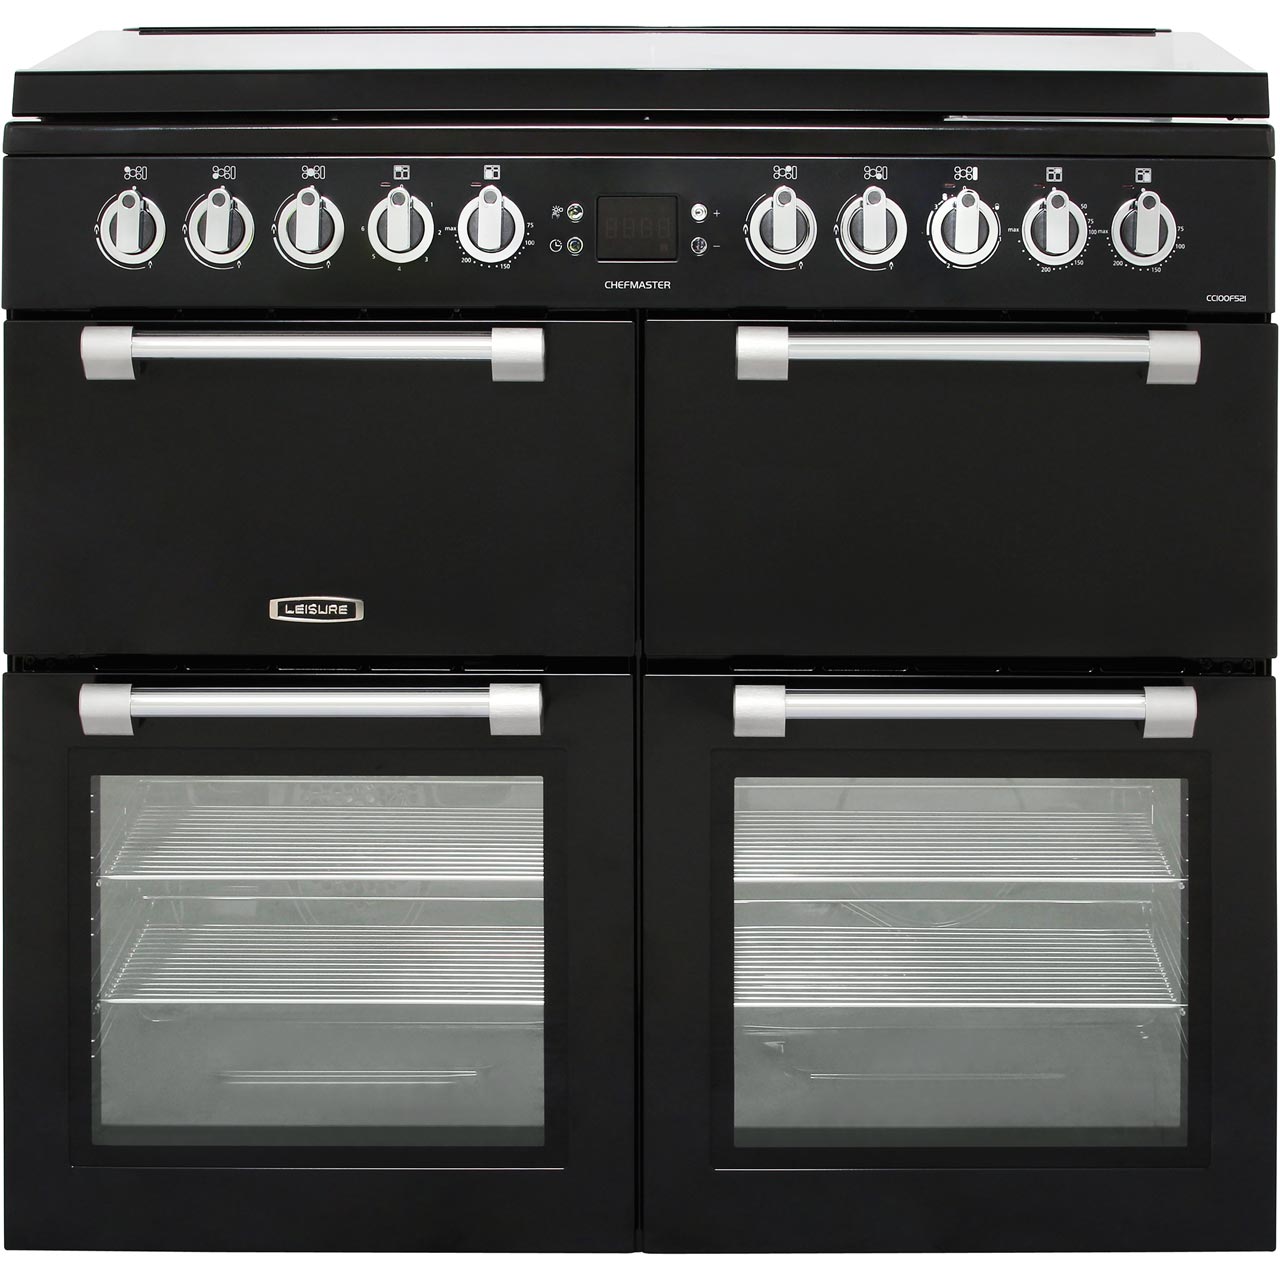 Leisure Chefmaster CC100F521K 100cm Dual Fuel Range Cooker - Black - A/A/A Rated, Black